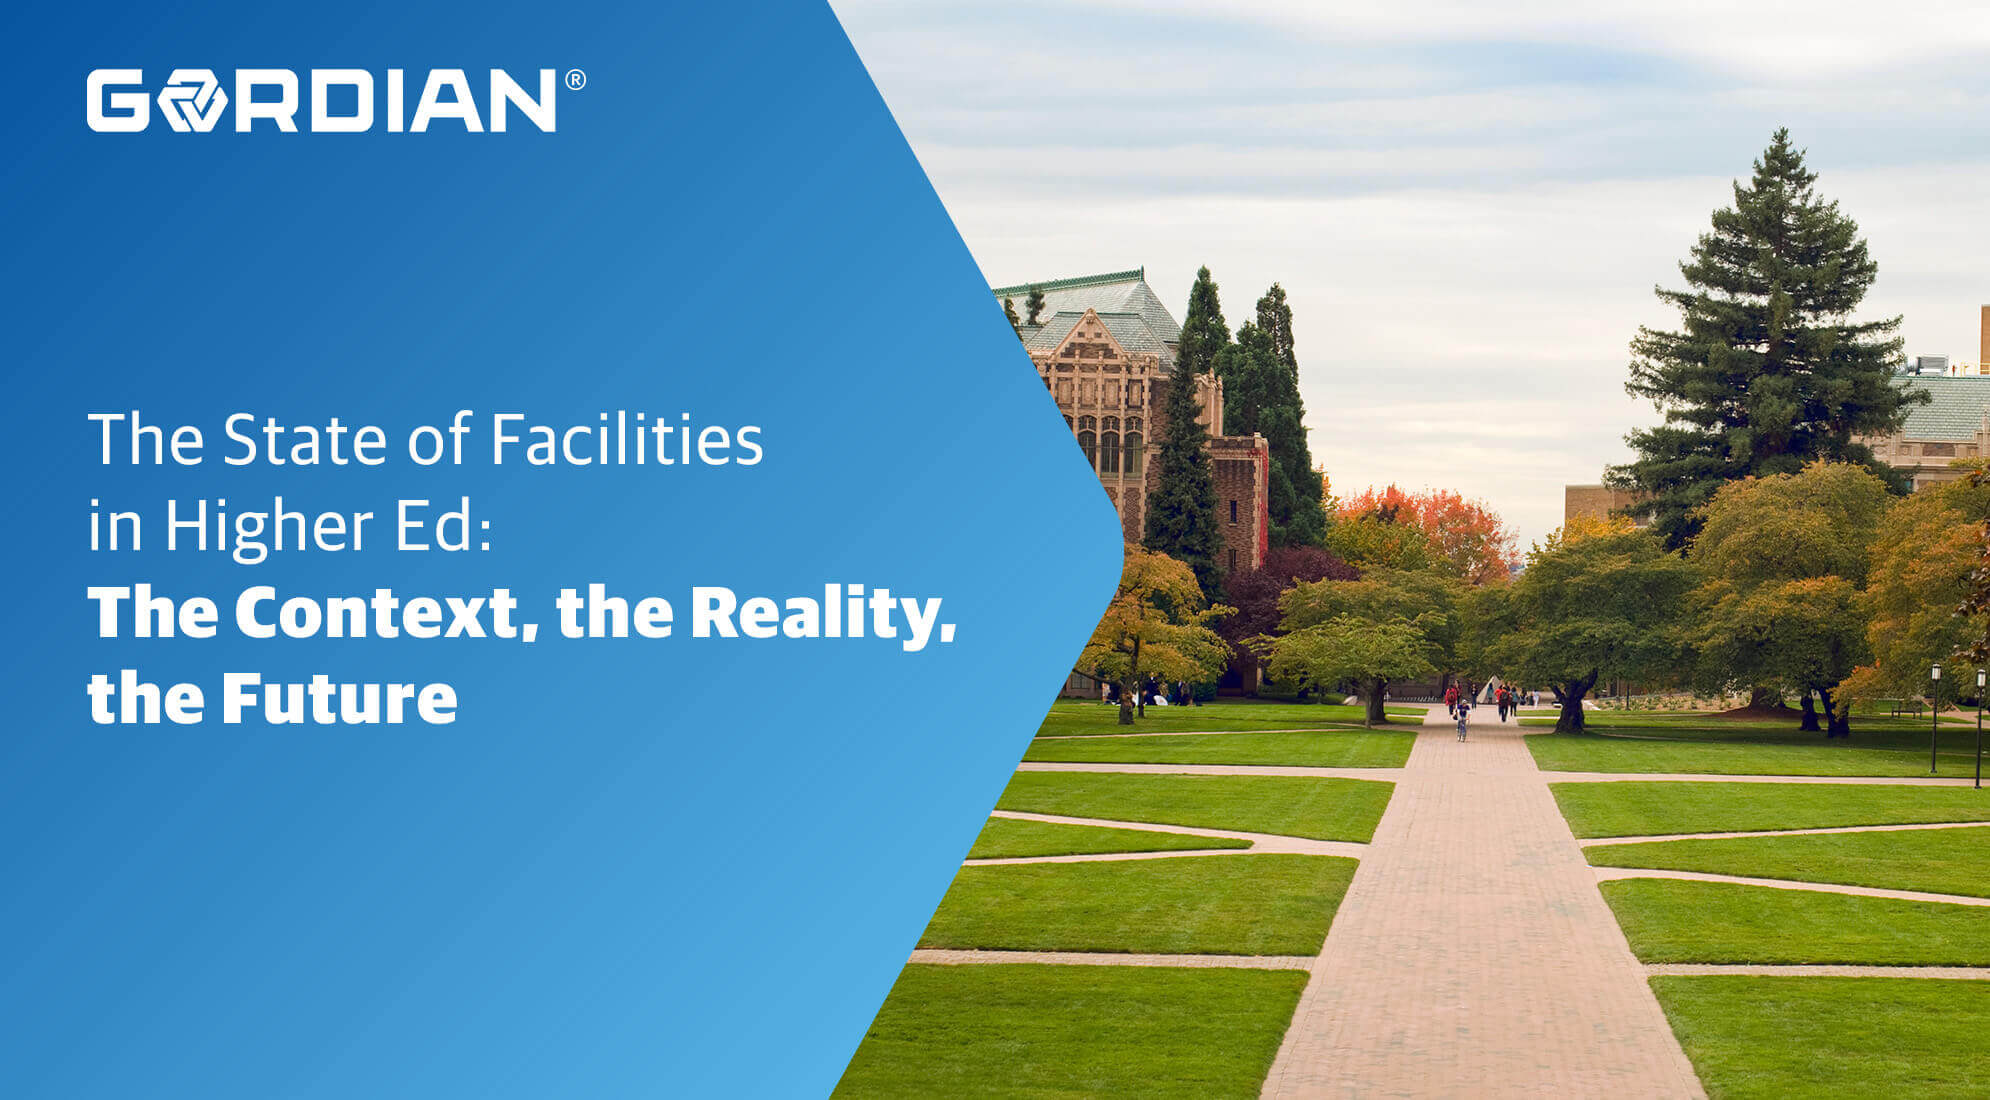 The State of Facilities in Higher Ed - The Context, the Reality, the Future 2